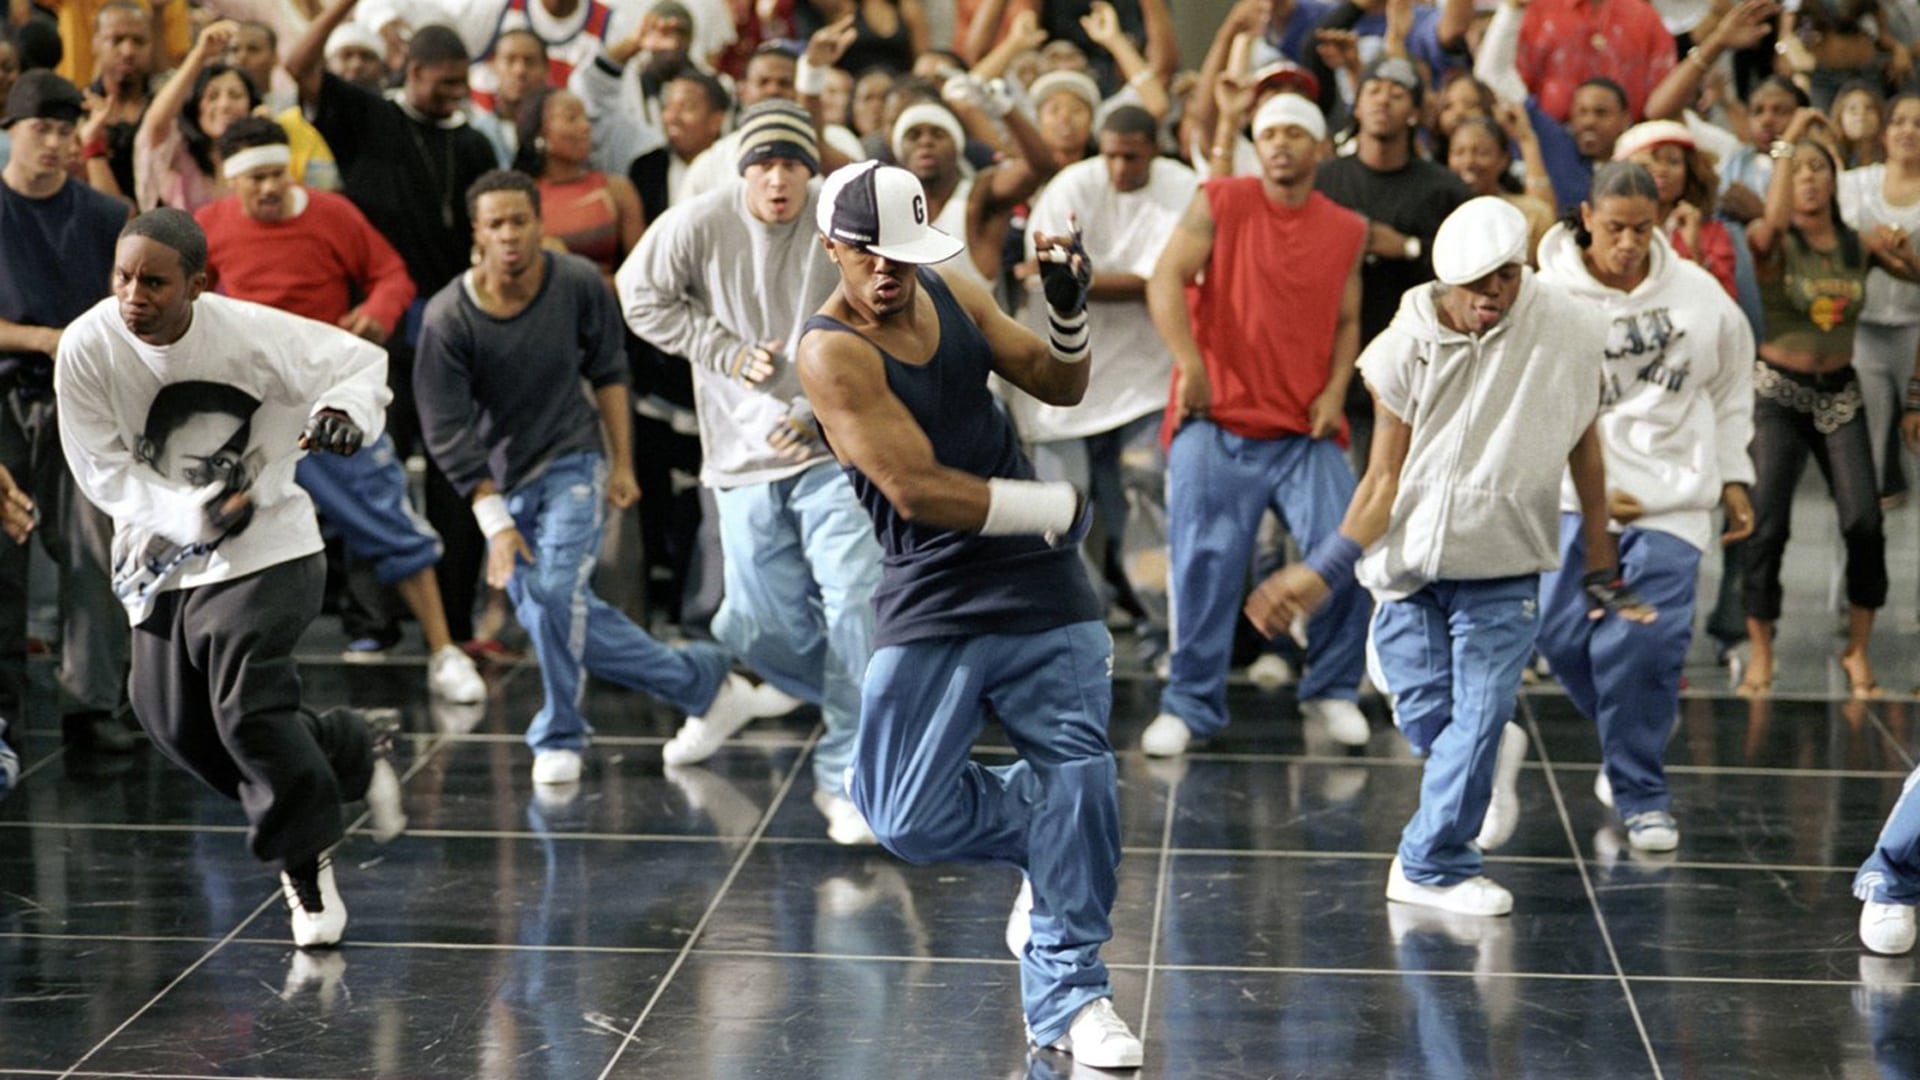 You Got Served, Movie streaming online, Engaging storyline, Exciting dance sequences, 1920x1080 Full HD Desktop